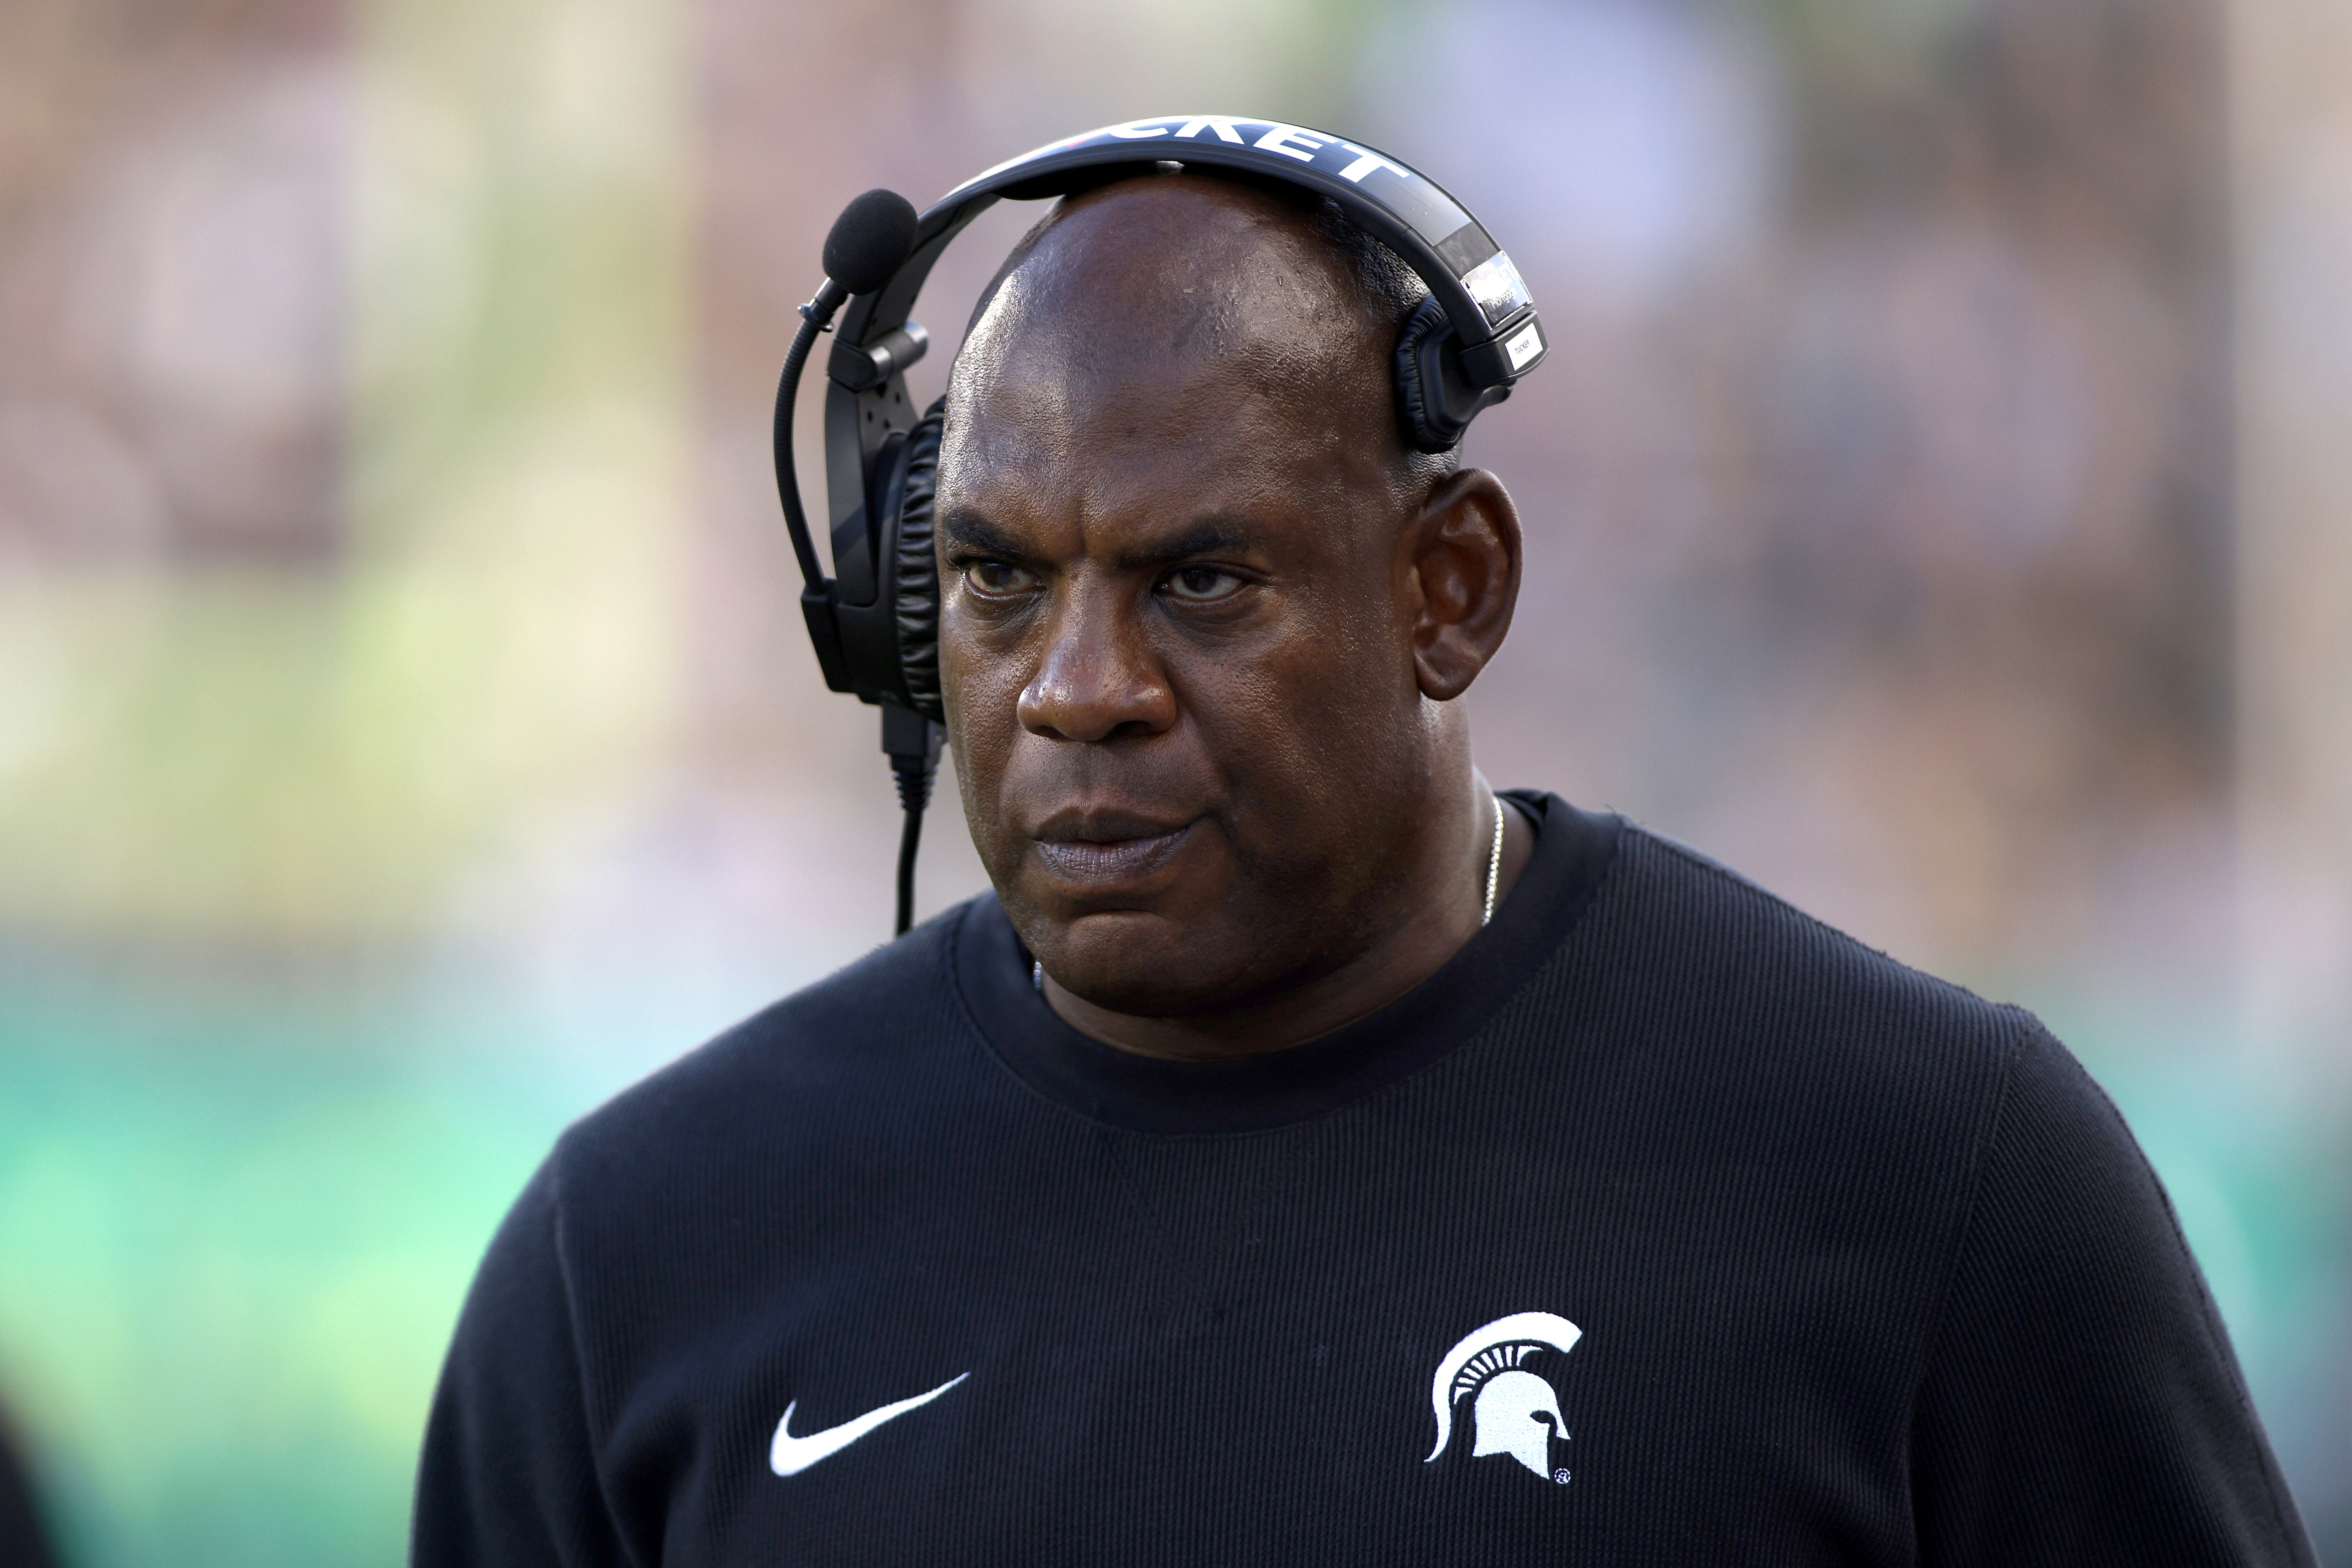 Mel Tuckers attorney Michigan State doesnt have cause to fire suspended coach over phone photo